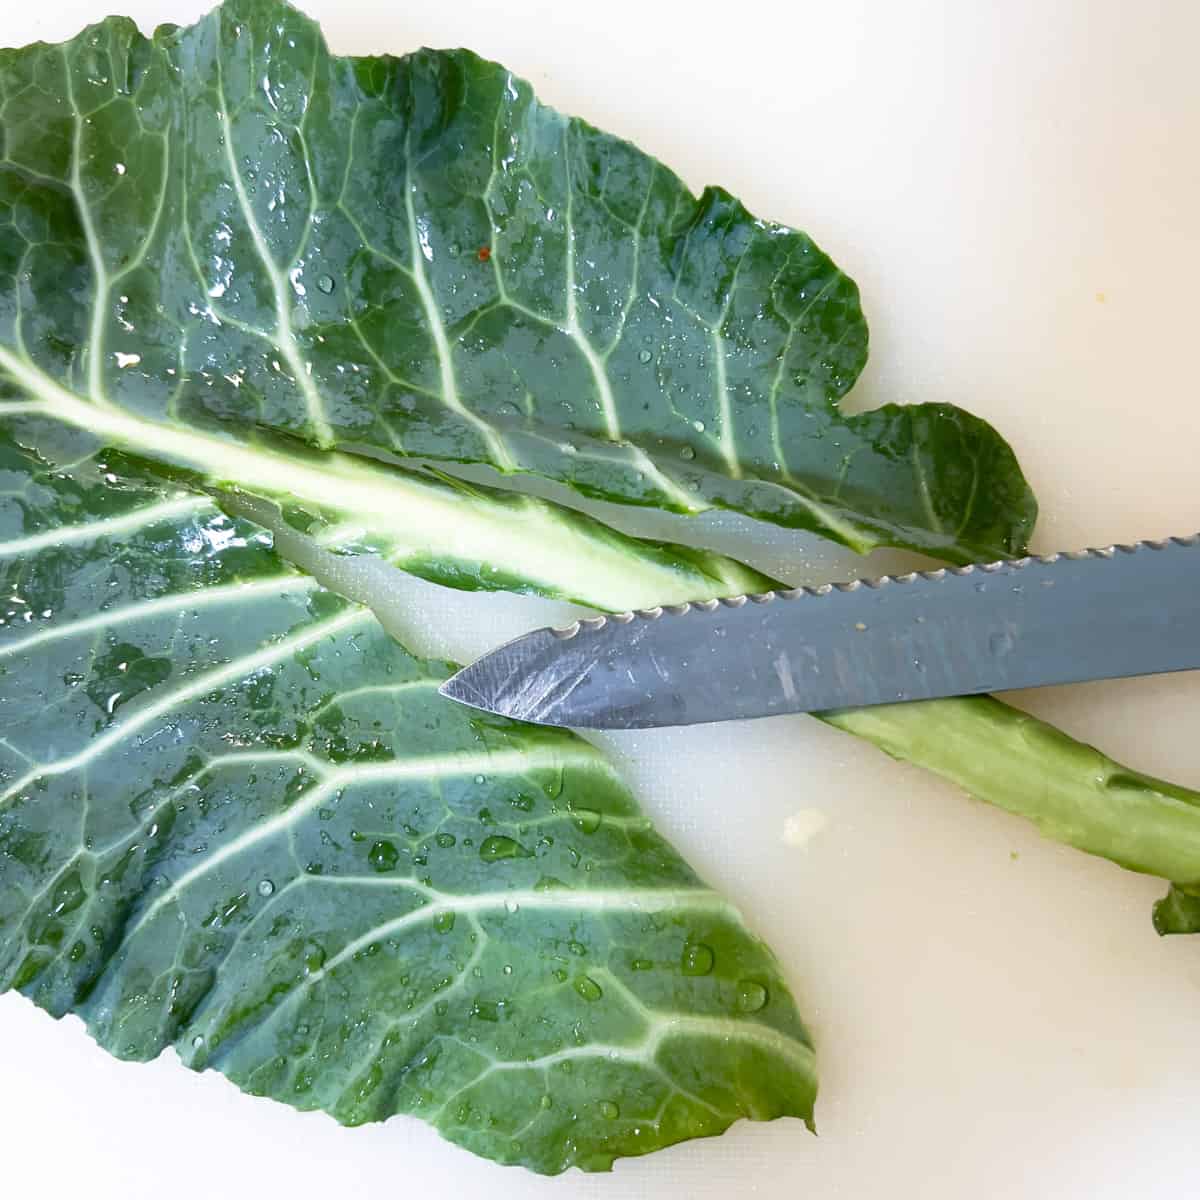 Collard Green leaf with stem partially cut away from leaf.